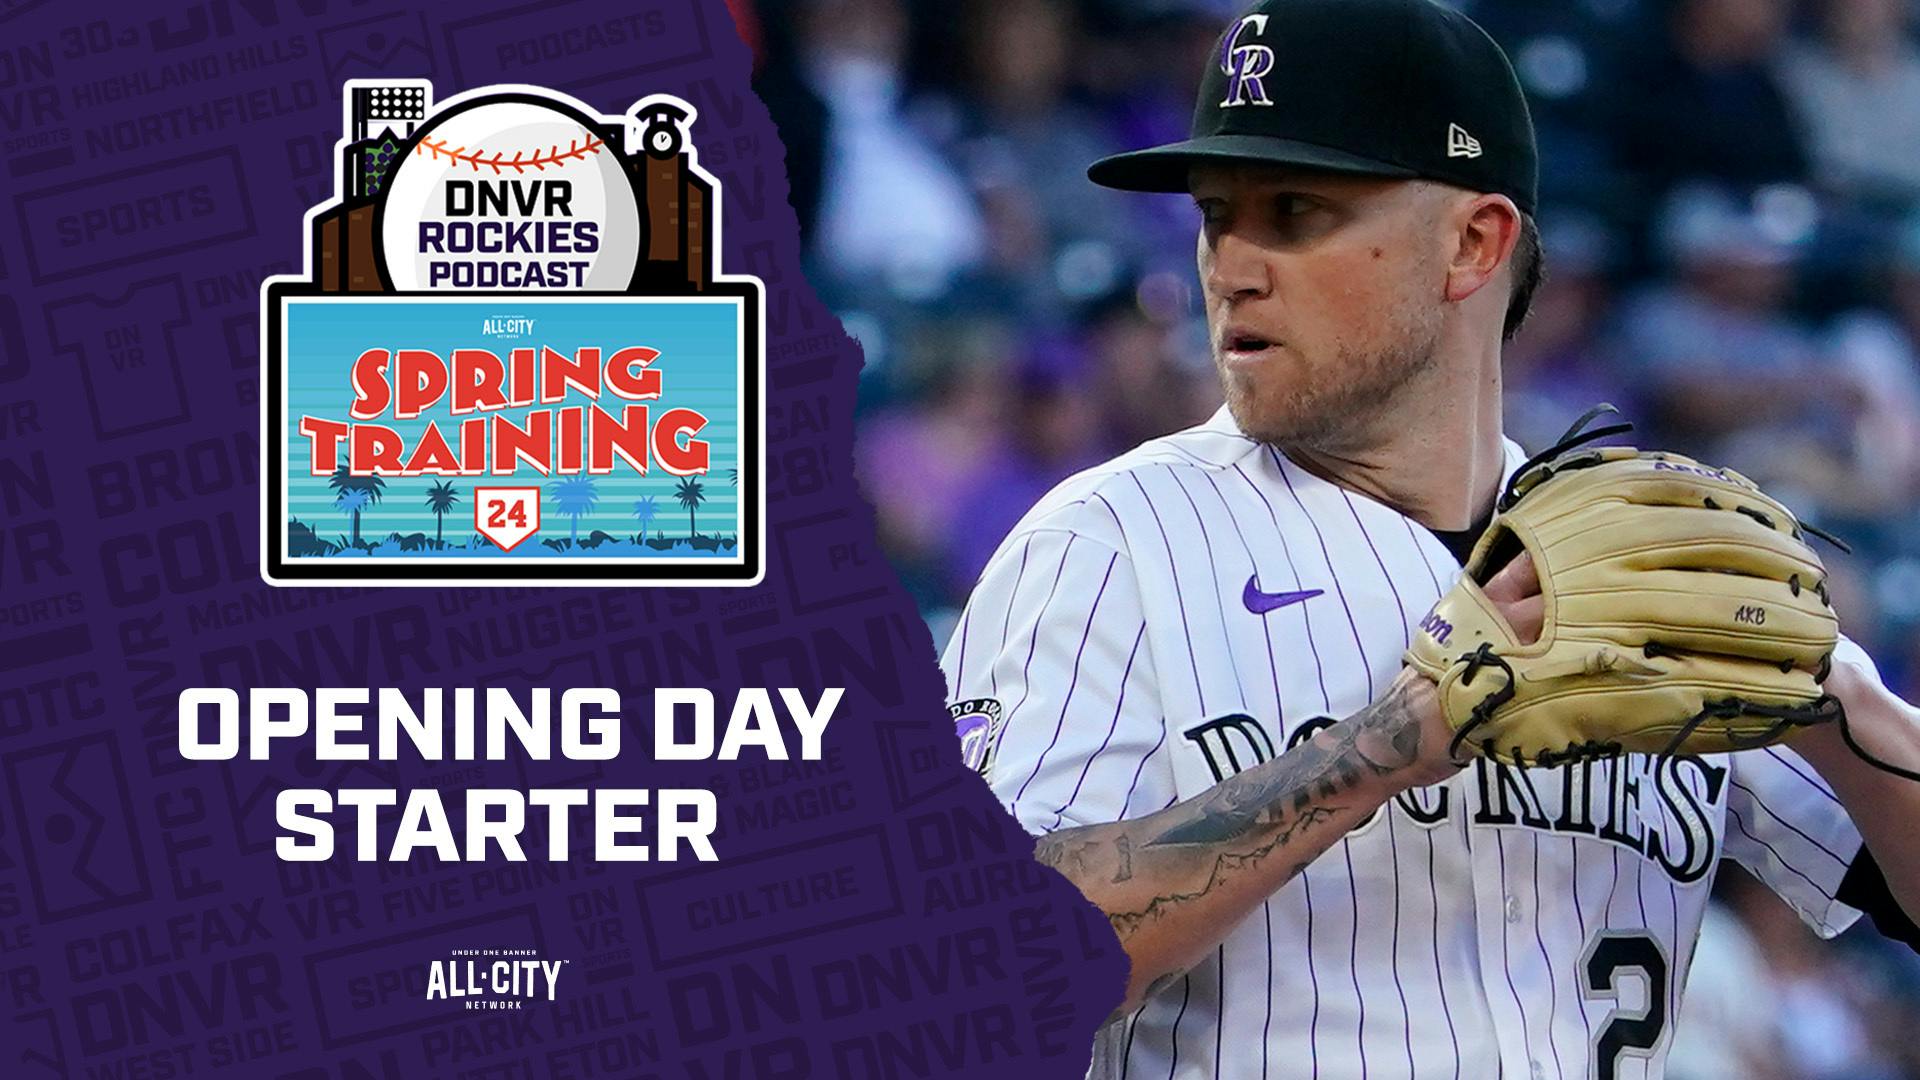 Kyle Freeland is Colorado’s Opening Day starter; NL West showdown opens MLB season | DNVR Rockies Podcast